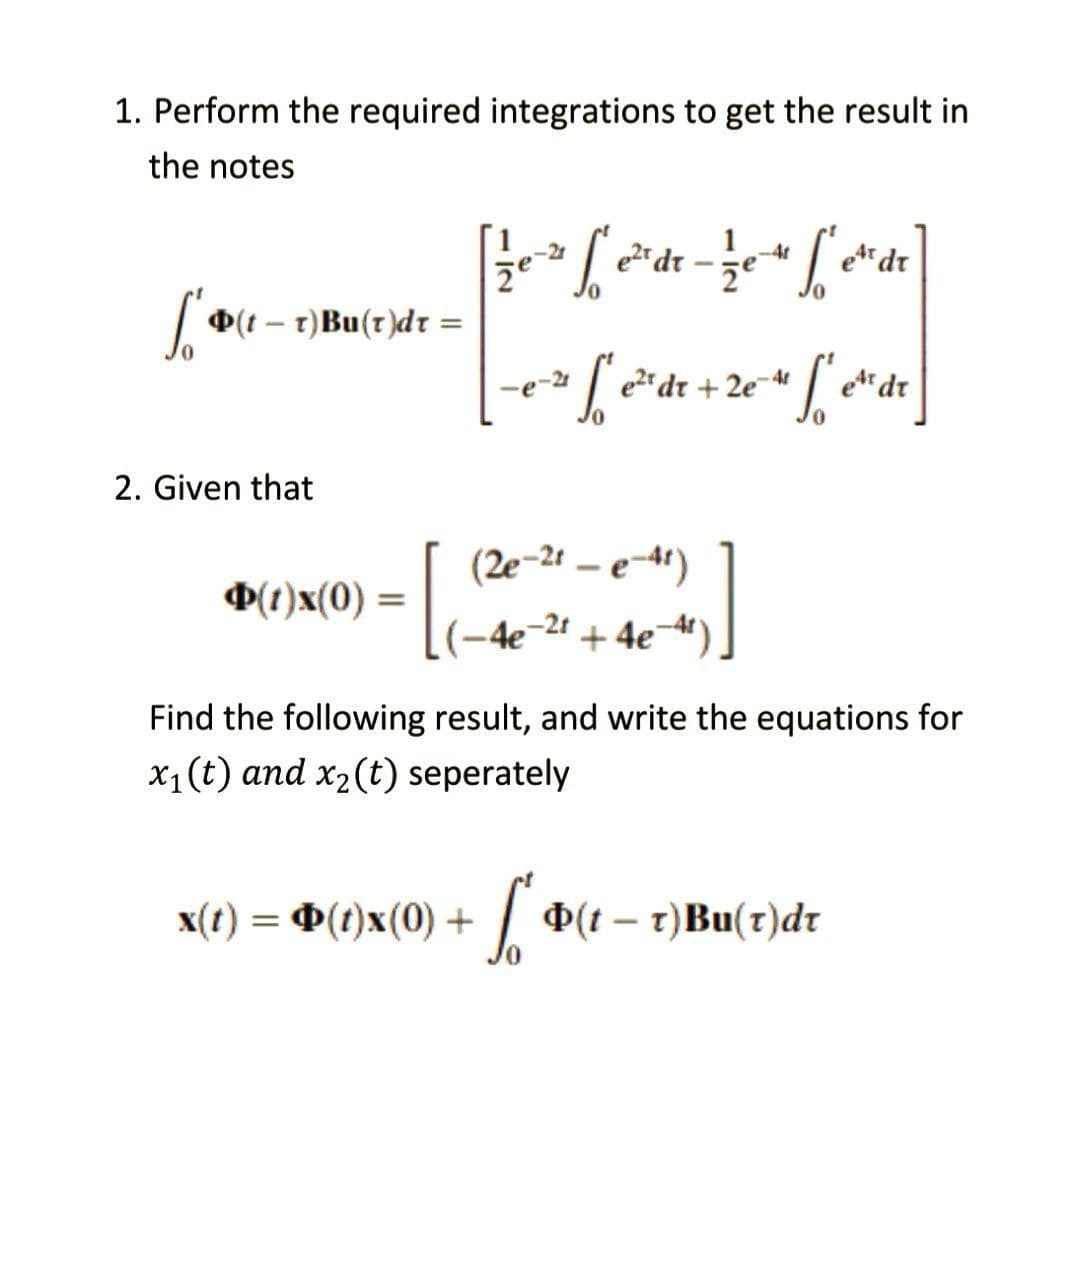 1. Perform the required integrations to get the result in
the notes
-41
[ e² dr - 12 e 4 fe²
et dr
že
["(t = T) Bu(r)dt =
-
-e-² f²e²² dr +2e=41
2e-4 f et dr
2. Given that
(2e-21-e-41)
(1)x(0) =
-4e-2t + 4e¯
Find the following result, and write the equations for
x₁ (t) and x₂ (t) seperately
x(t) = Þ(t)x(0) +
So
(tr)Bu(r)dr